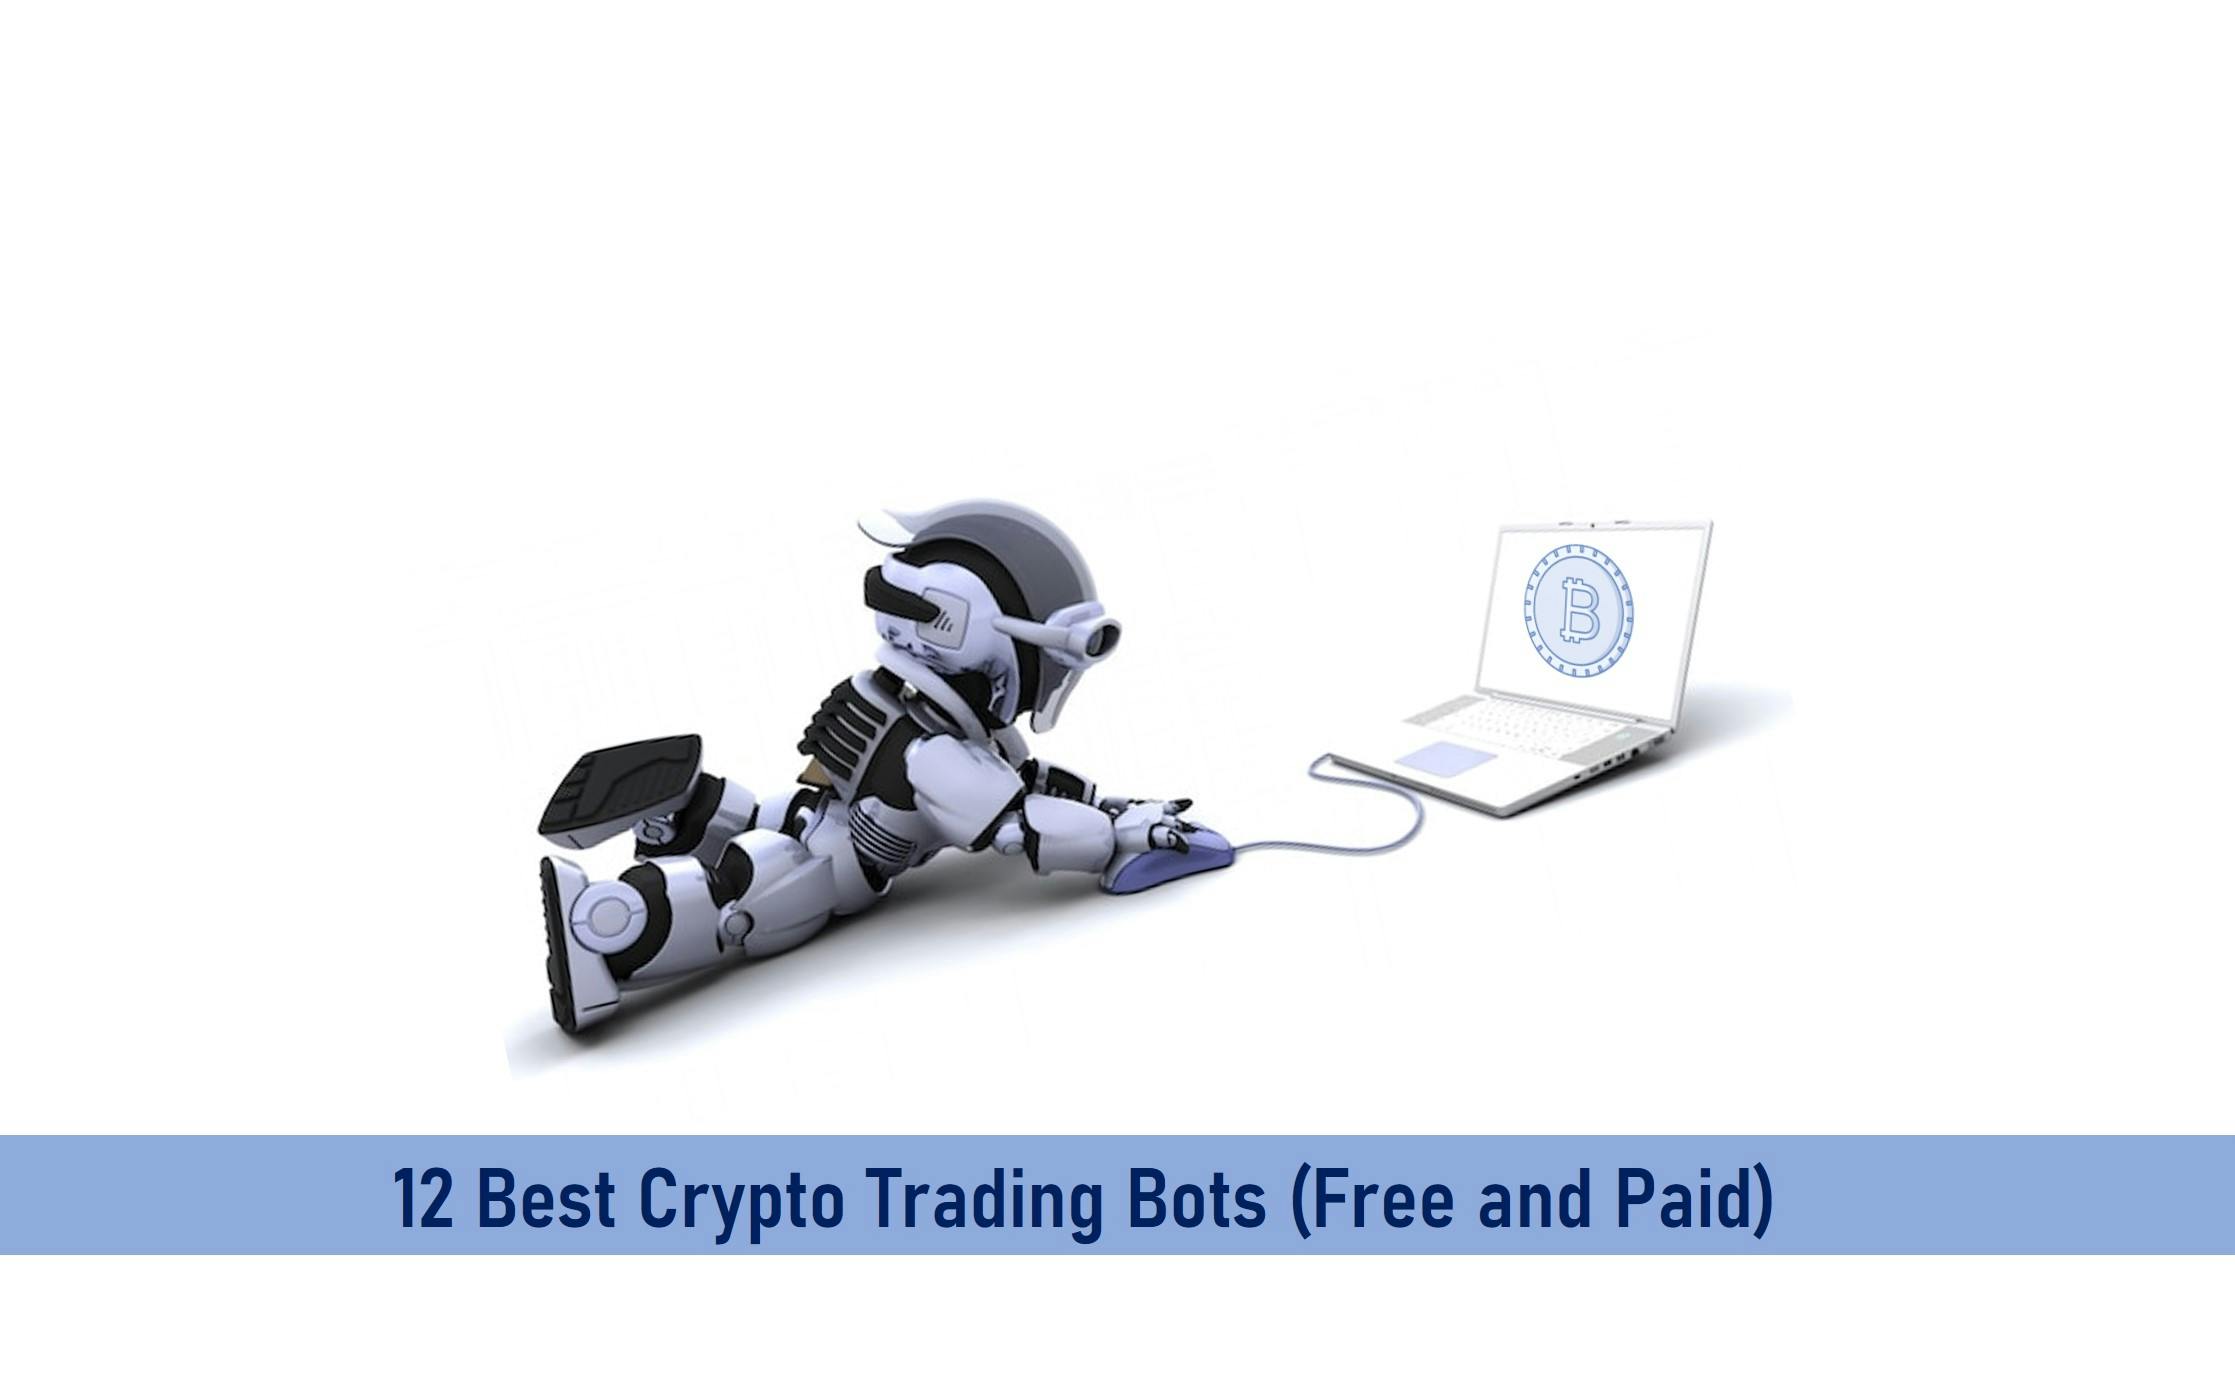 12 Best Crypto Trading Bots (Free and Paid)